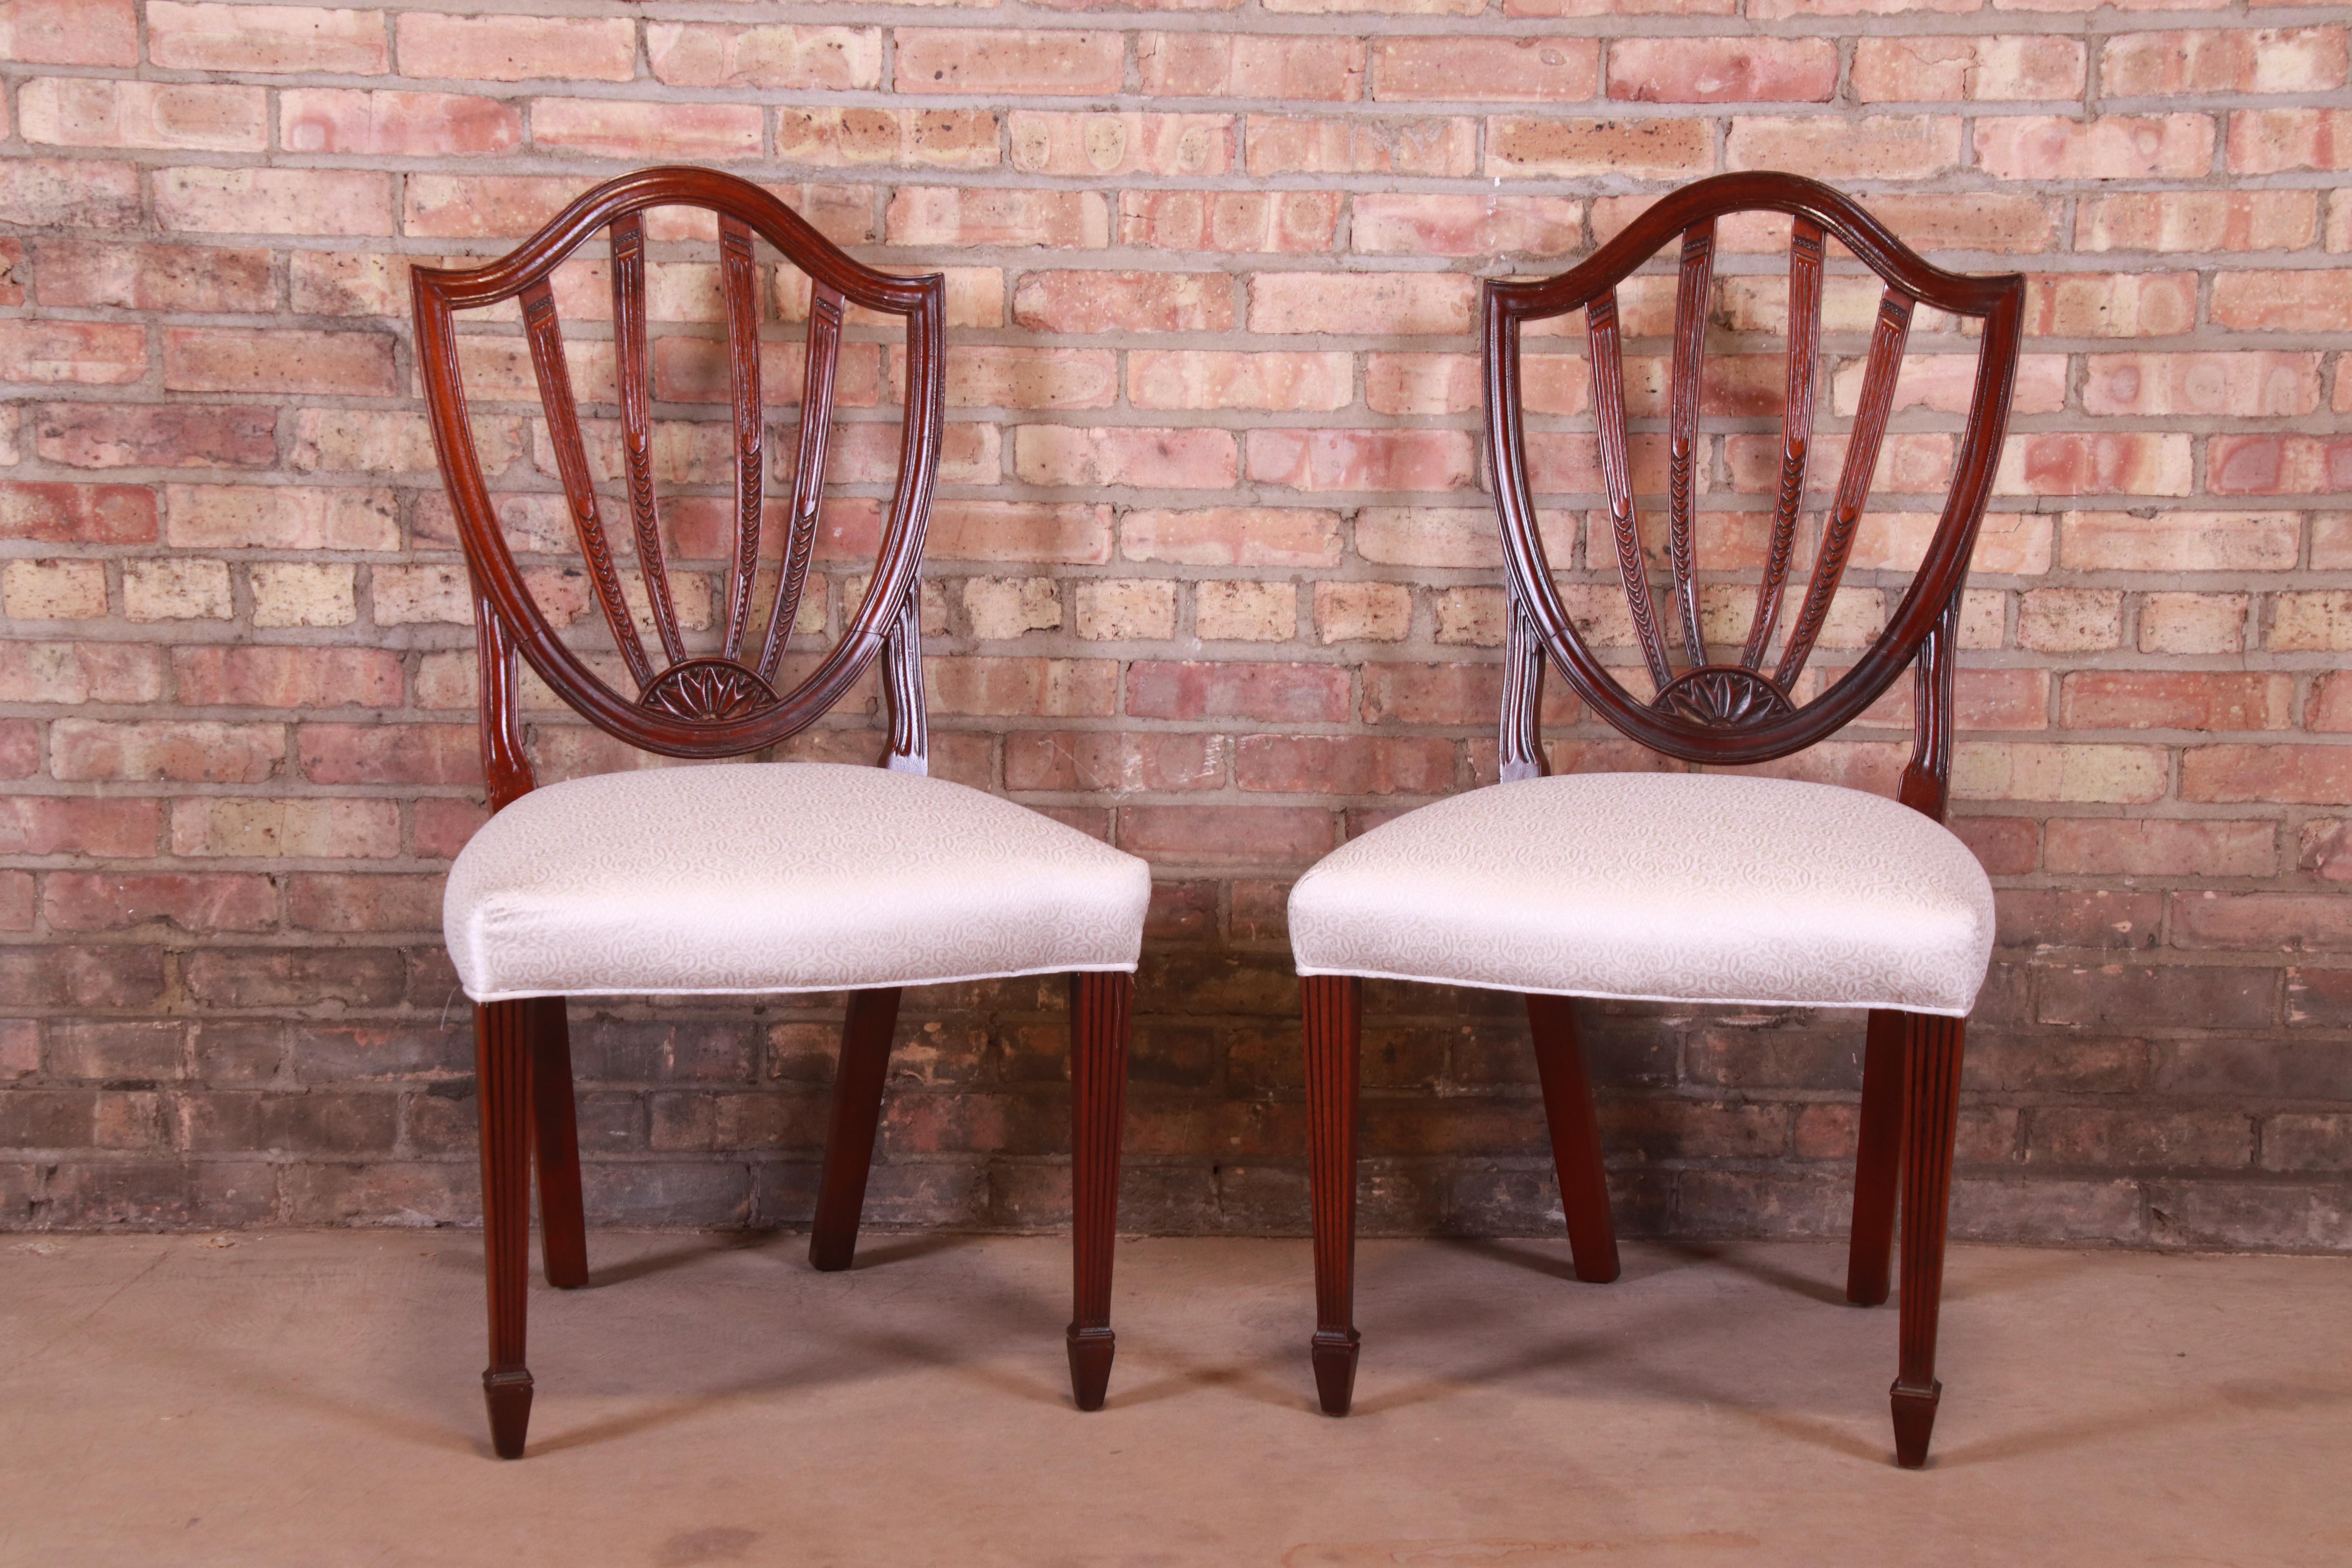 Upholstery Baker Furniture Mahogany Shield Back Dining Chairs, Set of Four